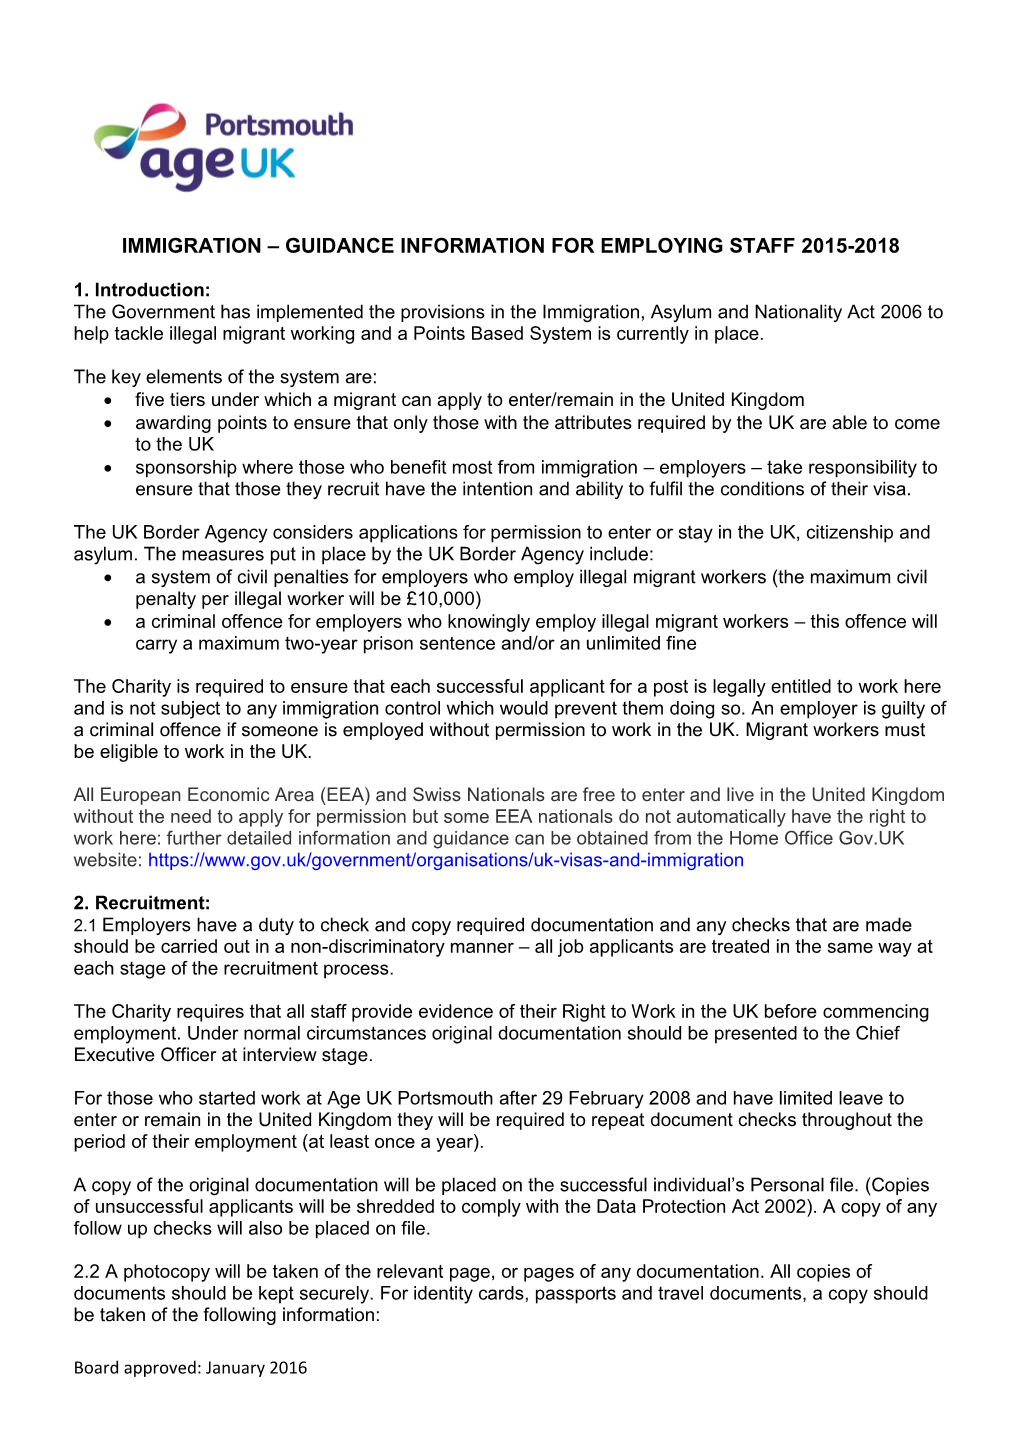 Immigration – Guidance Information for Employing Staff 2015-2018